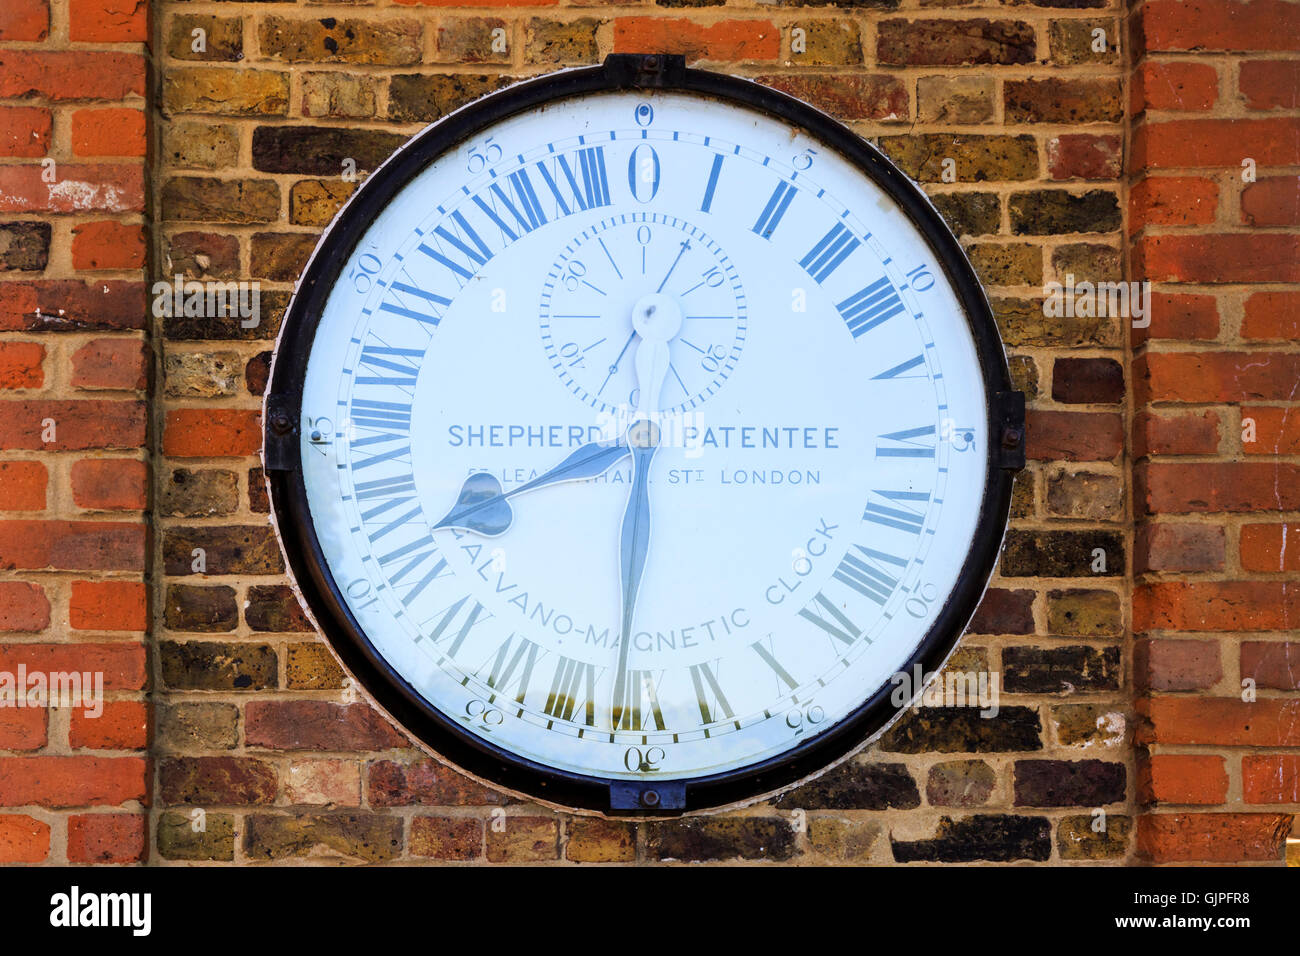 The Shepherd Gate Clock, an electric clock showing Greenwich Mean Time outside Royal Greenwich Observatory, London Stock Photo